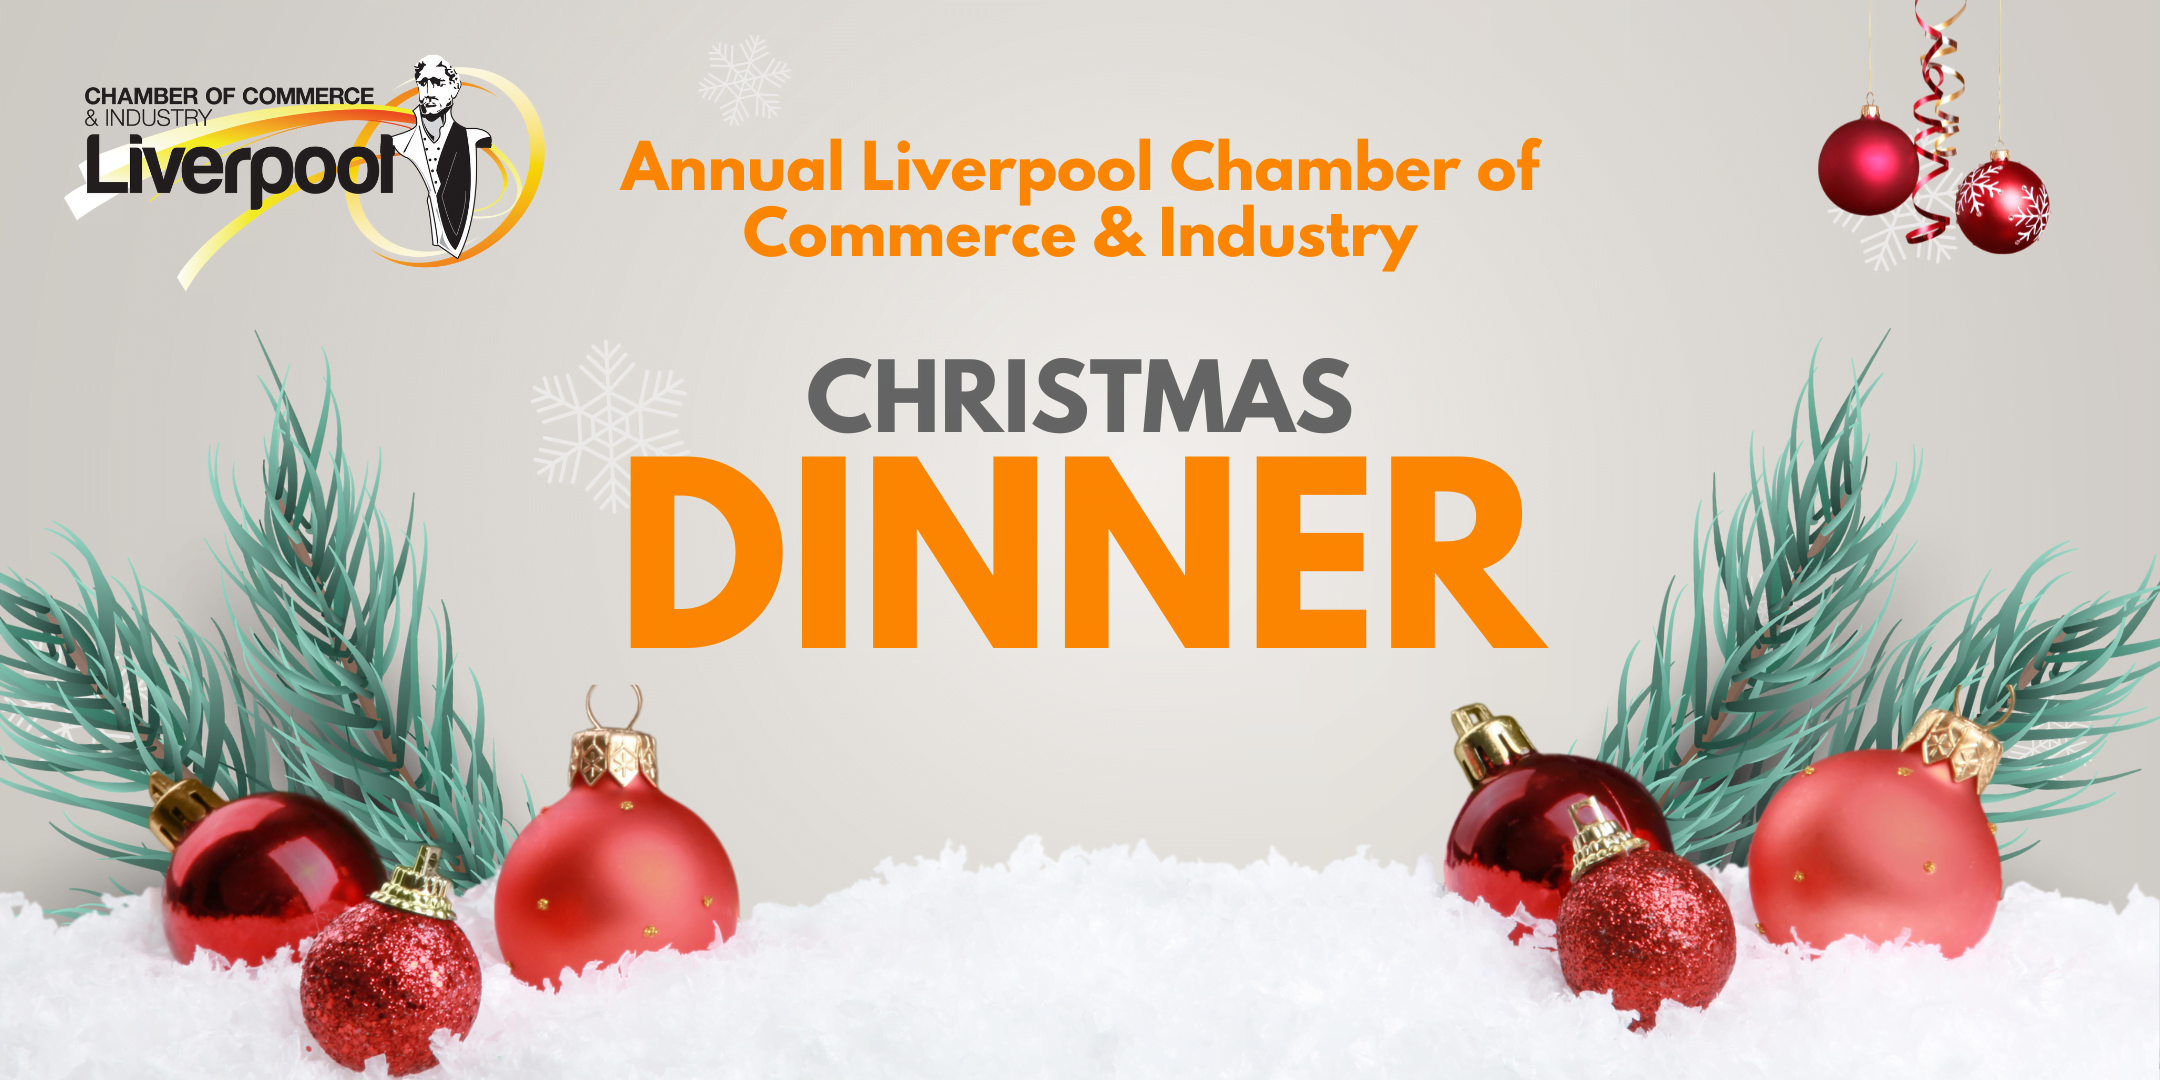 Liverpool Chamber's Annual Christmas Dinner